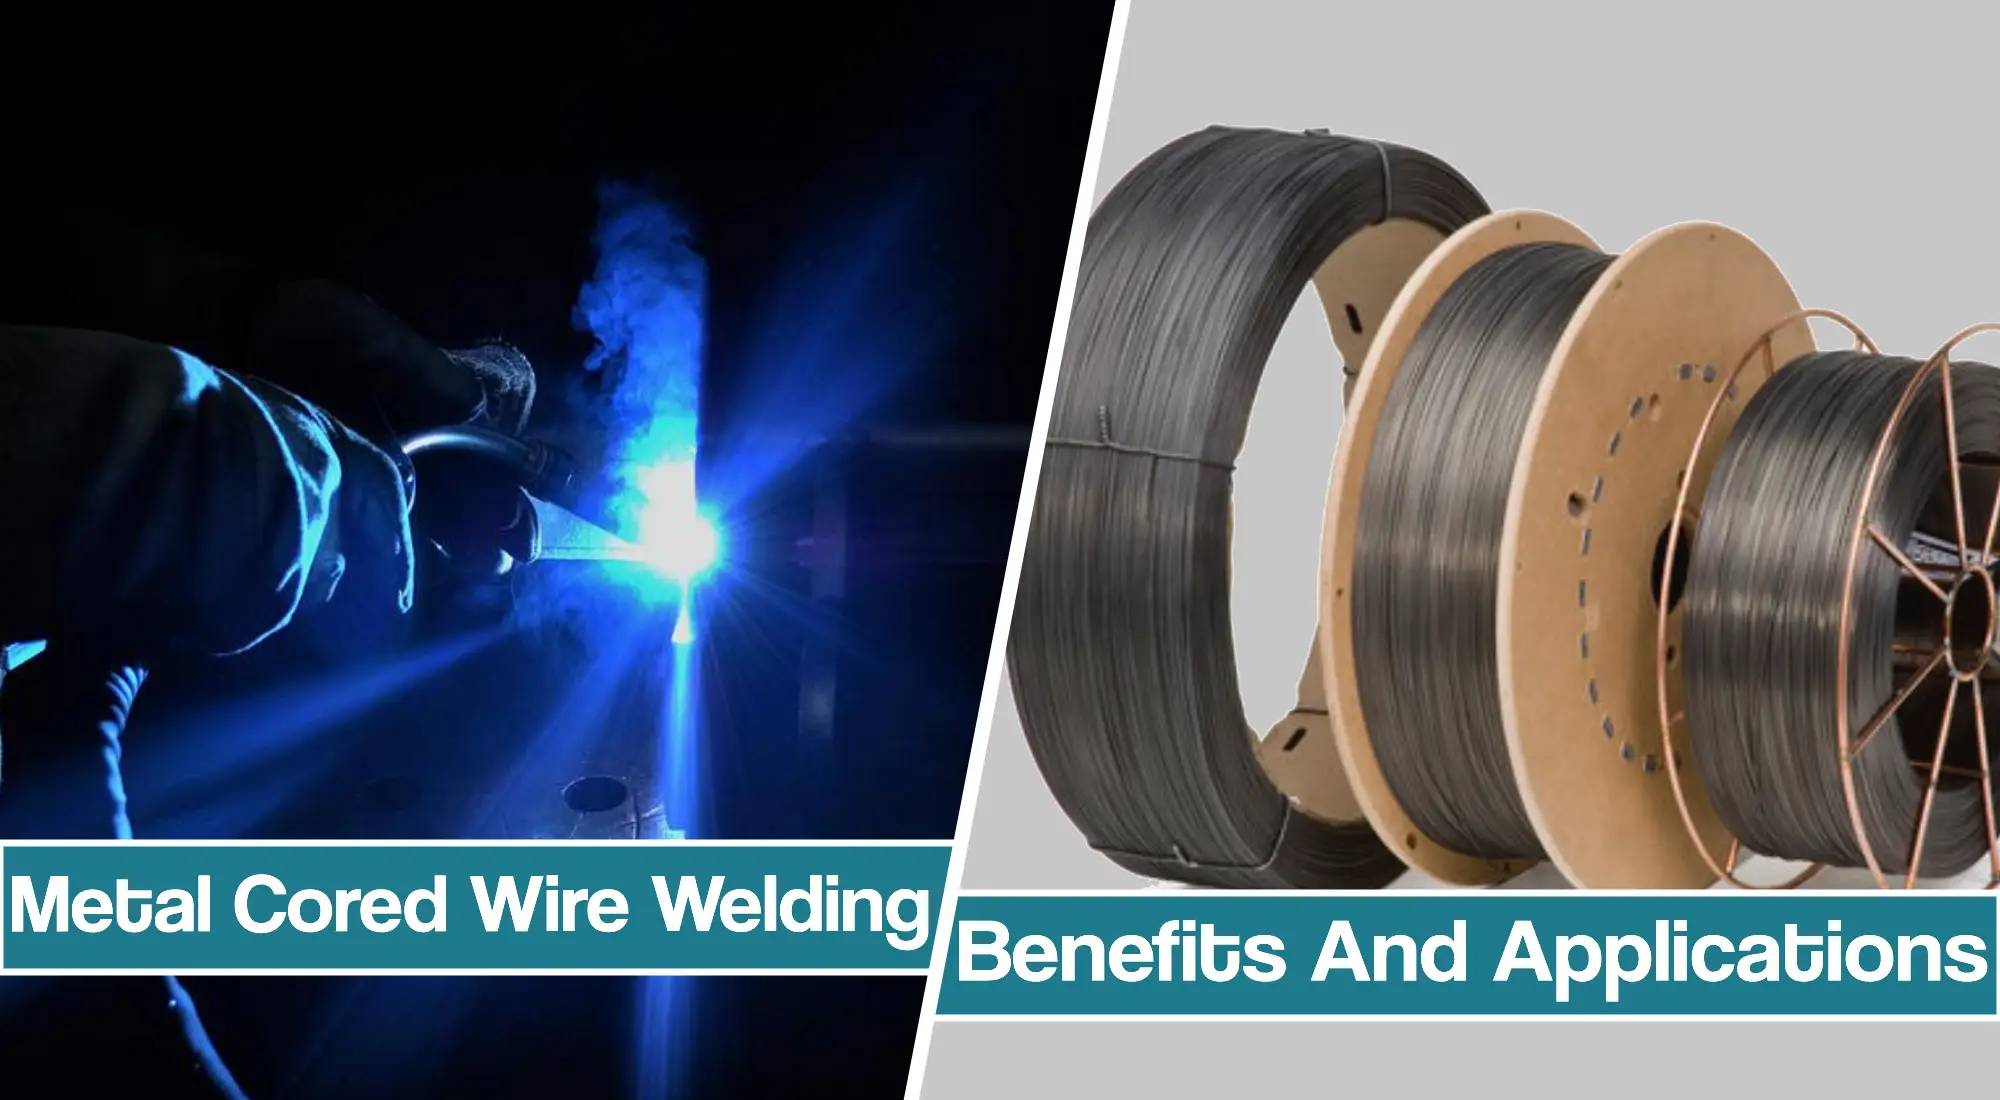 Metal Cored Wire Welding – Benefits And Applications